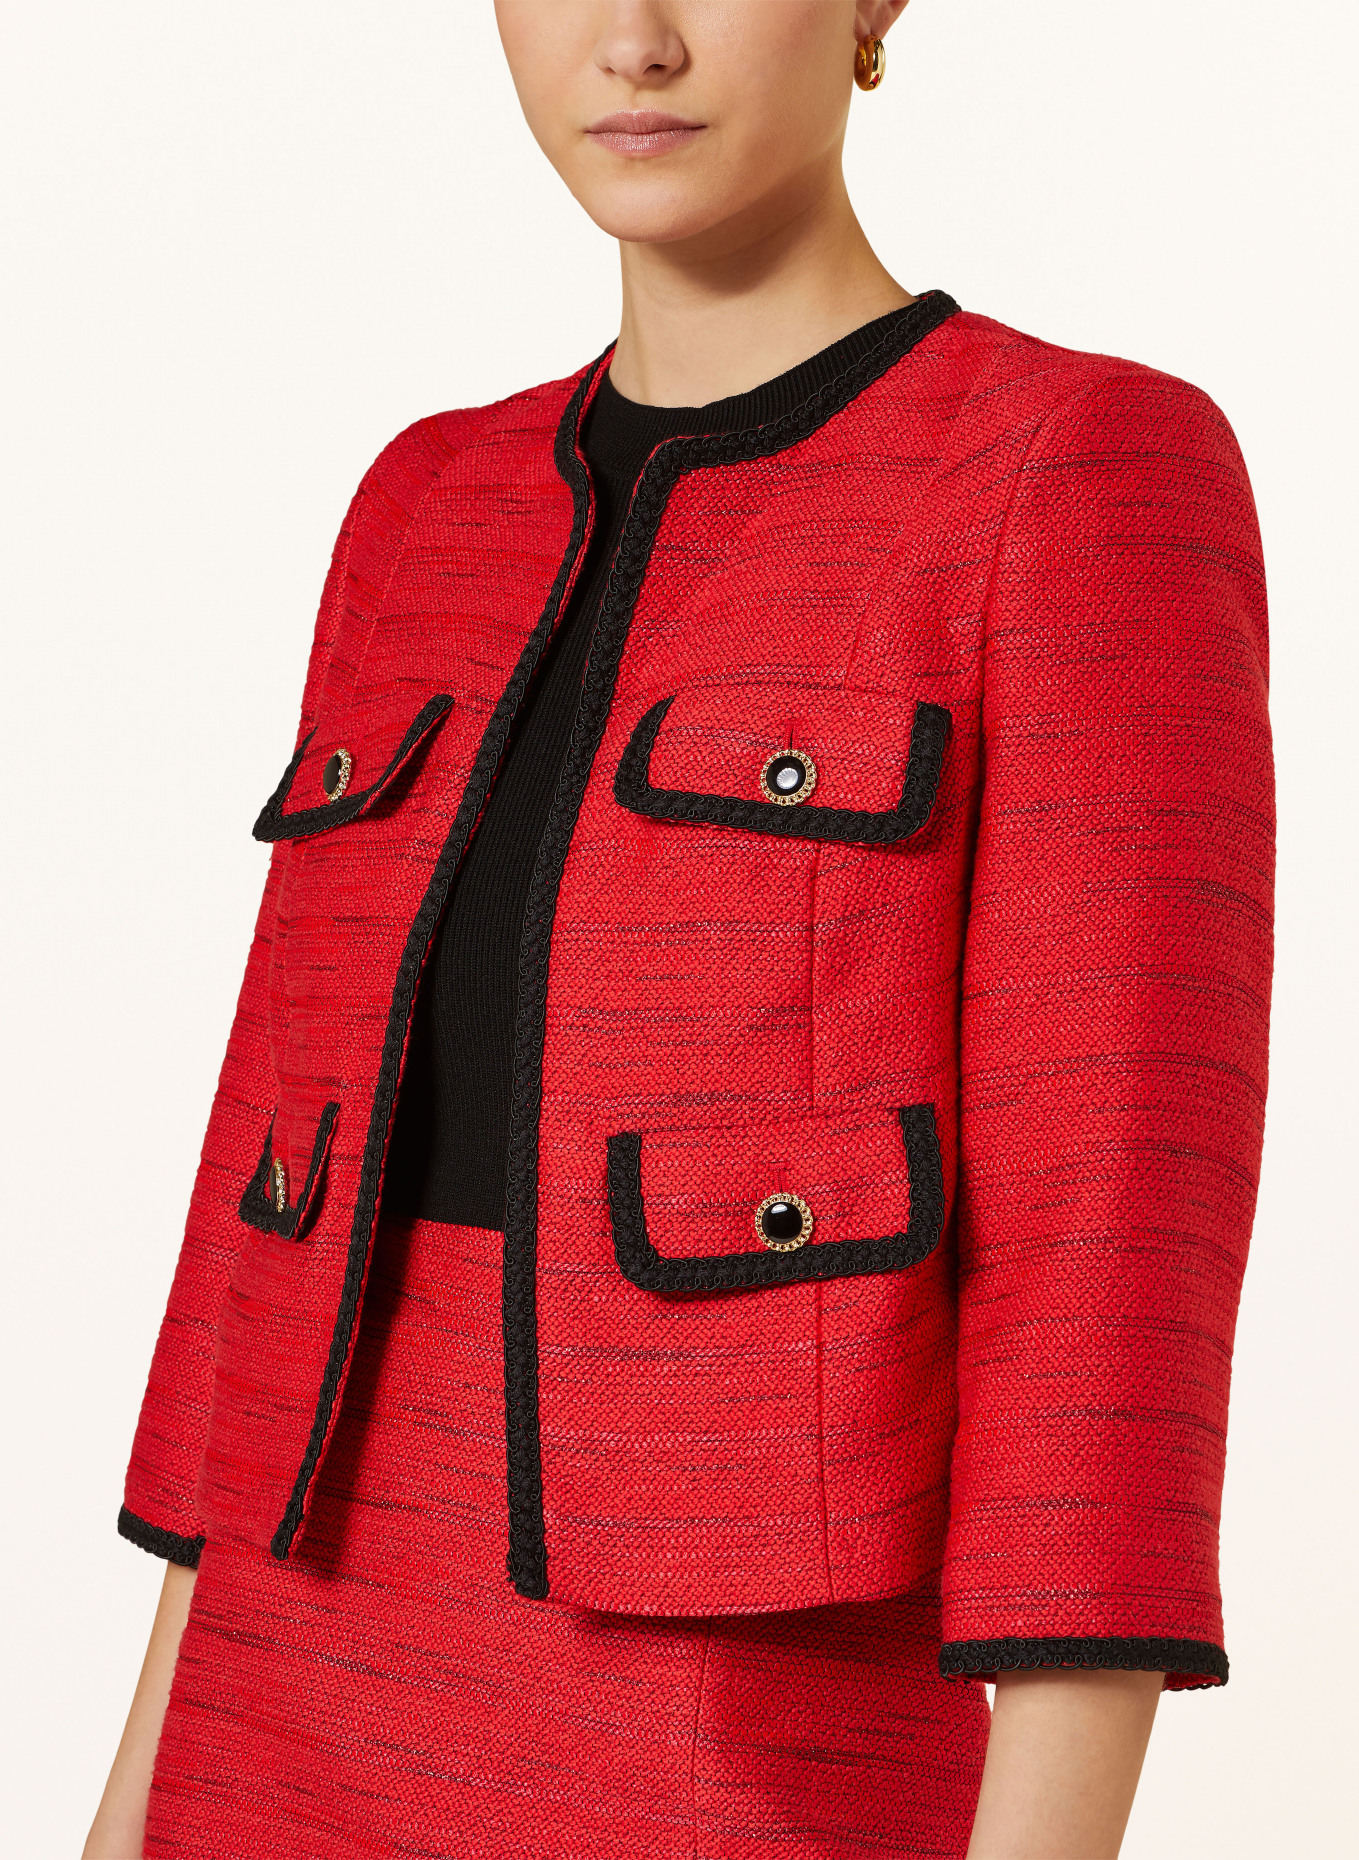 TED BAKER Boxy jacket OLIVAN made of tweed with glitter thread, Color: RED (Image 4)